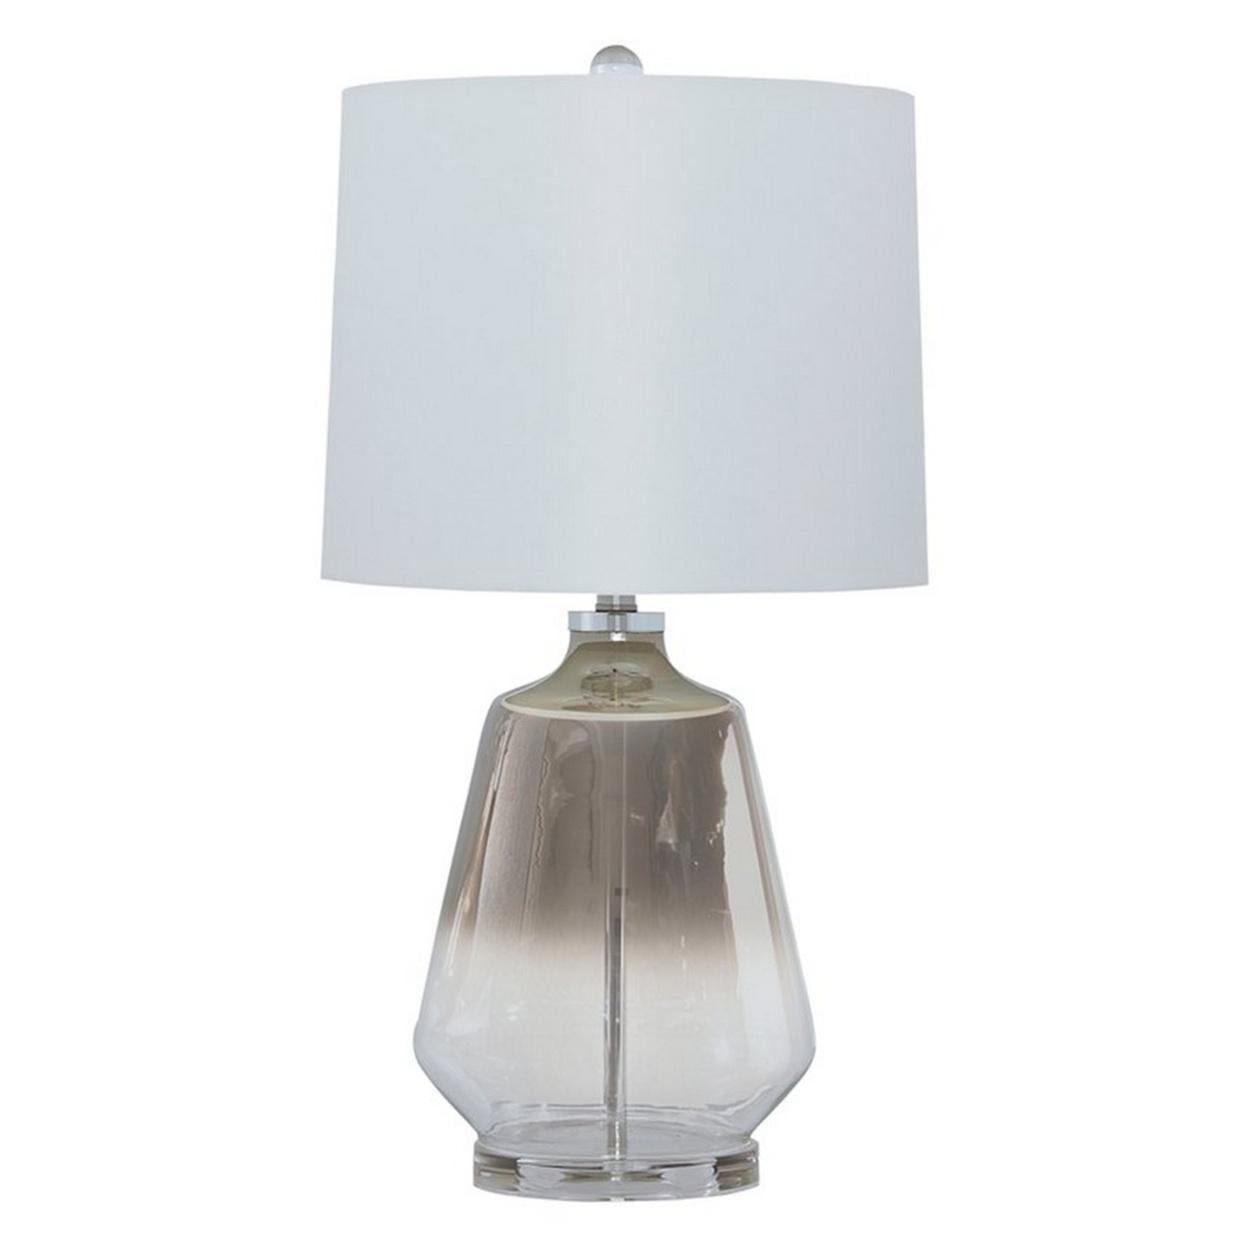 Sculptured Glass Frame Table Lamp With Fabric Shade, Gray And White- Saltoro Sherpi